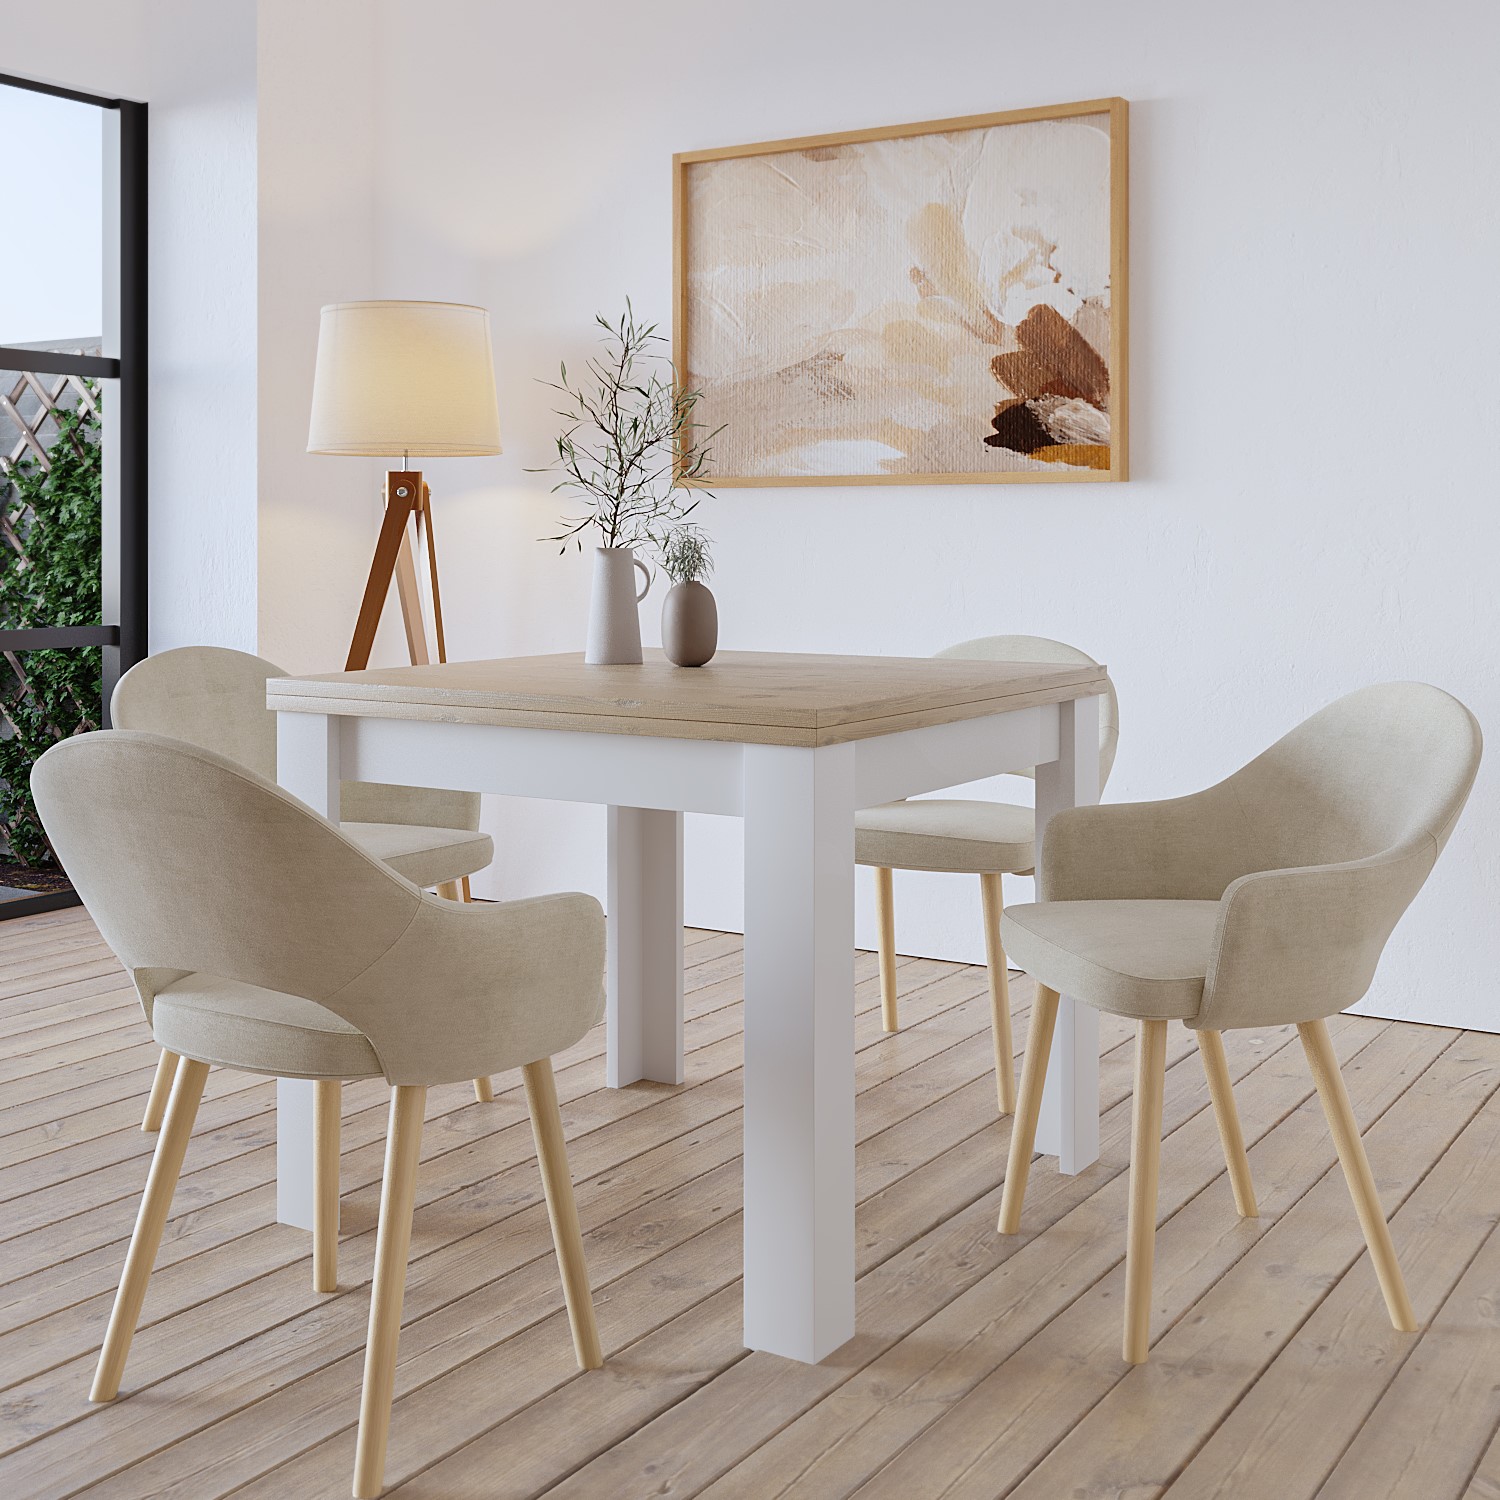 Photo of Cream and oak extendable dining table with 4 beige fabric dining chairs - new town